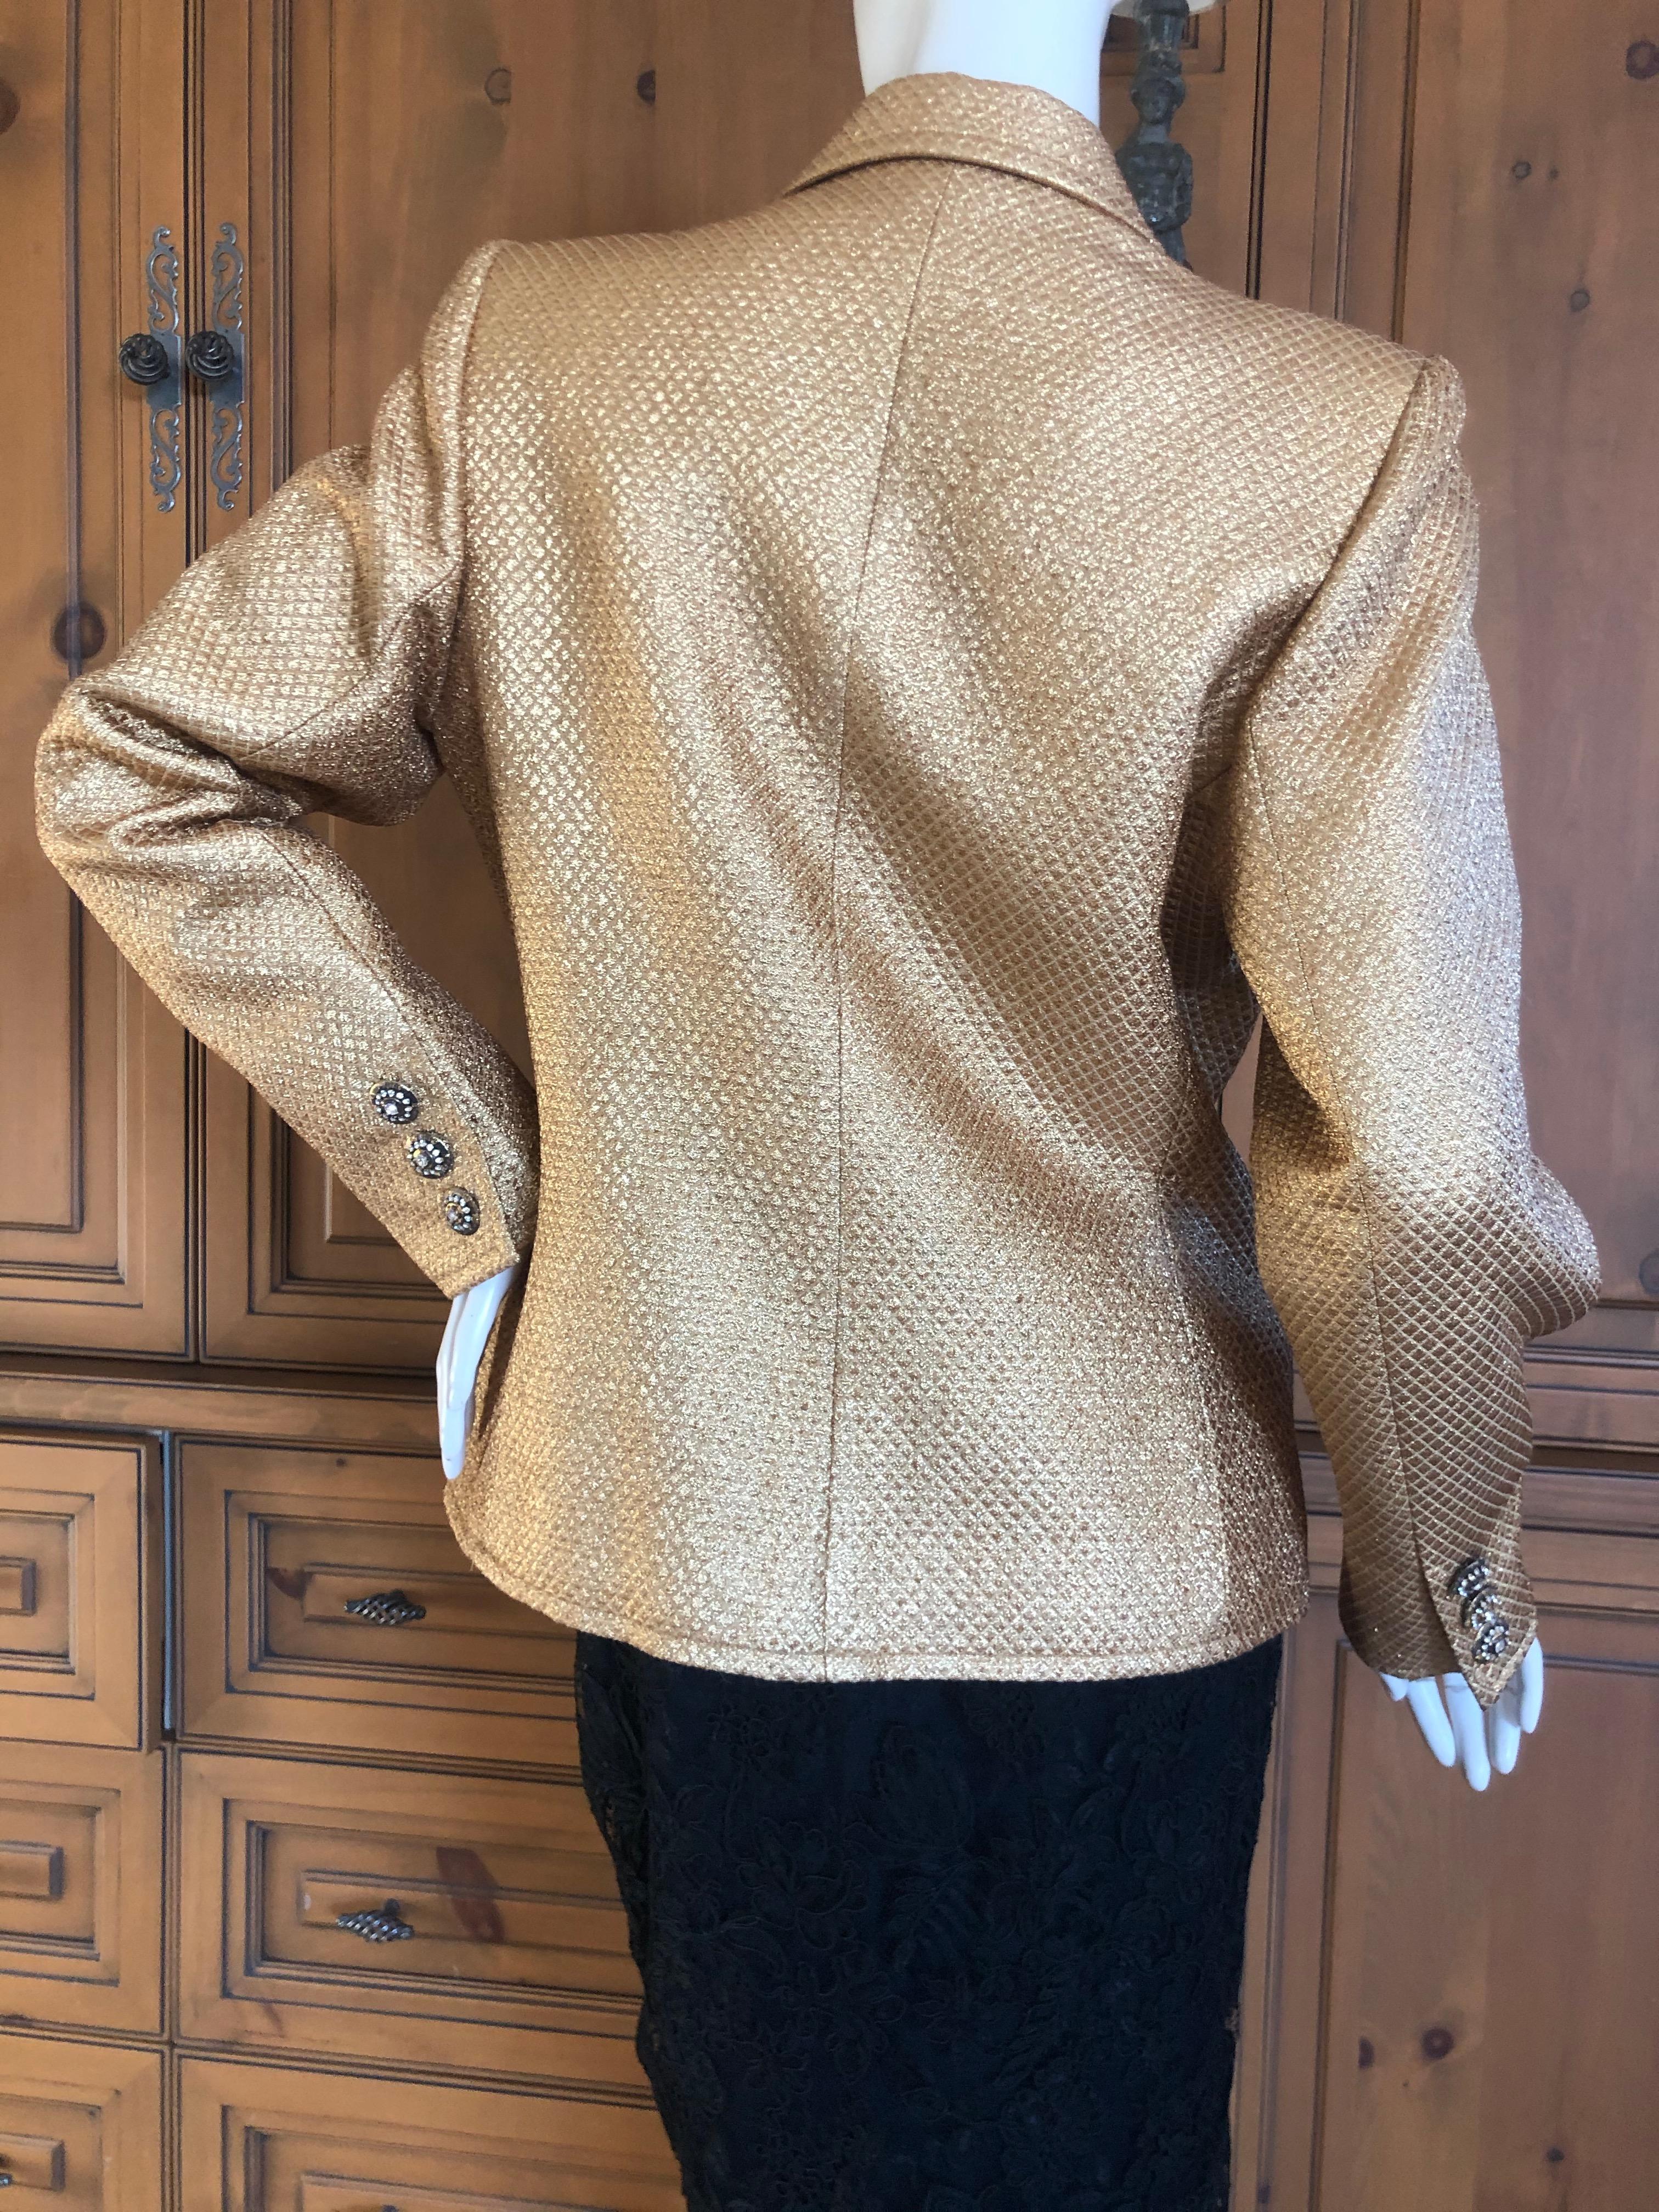 Yves Saint Laurent 1980's Gold Jacquard Jacket with Crystal Buttons For Sale 5